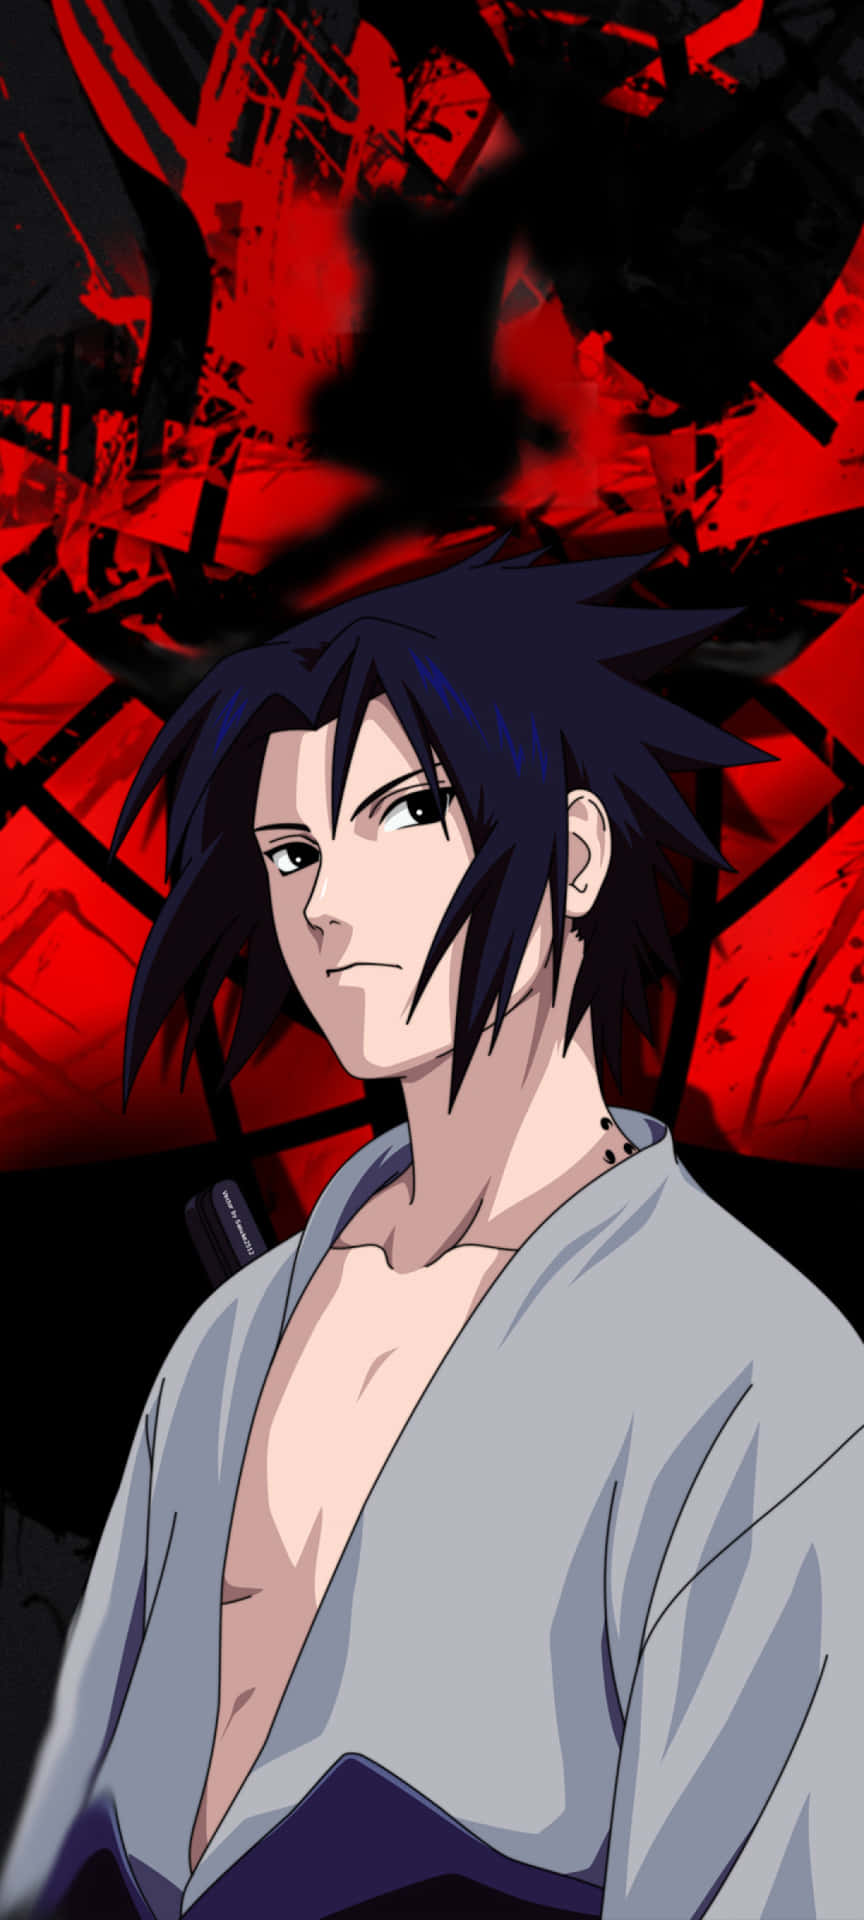 Fully enjoy the revolutionary features of the all-new Uchiha Iphone Wallpaper